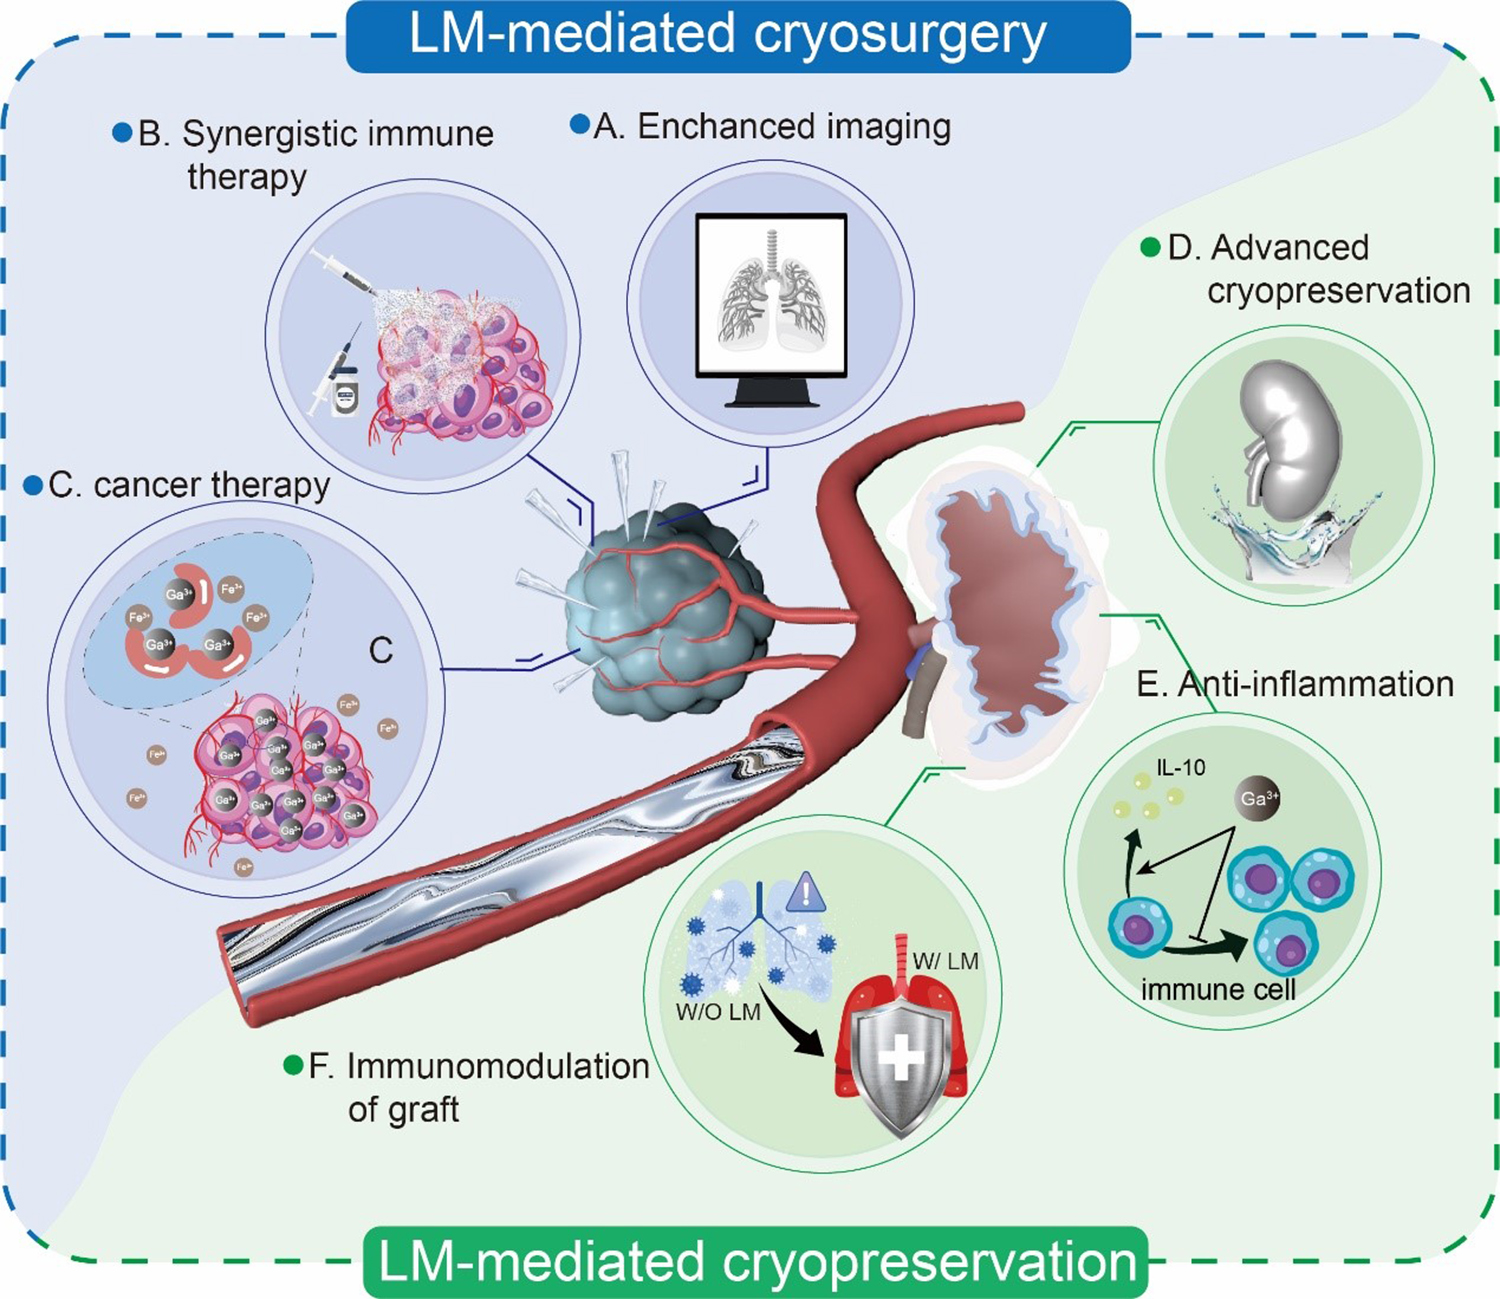 Liquid metals enabled advanced cryobiology: development and perspectives